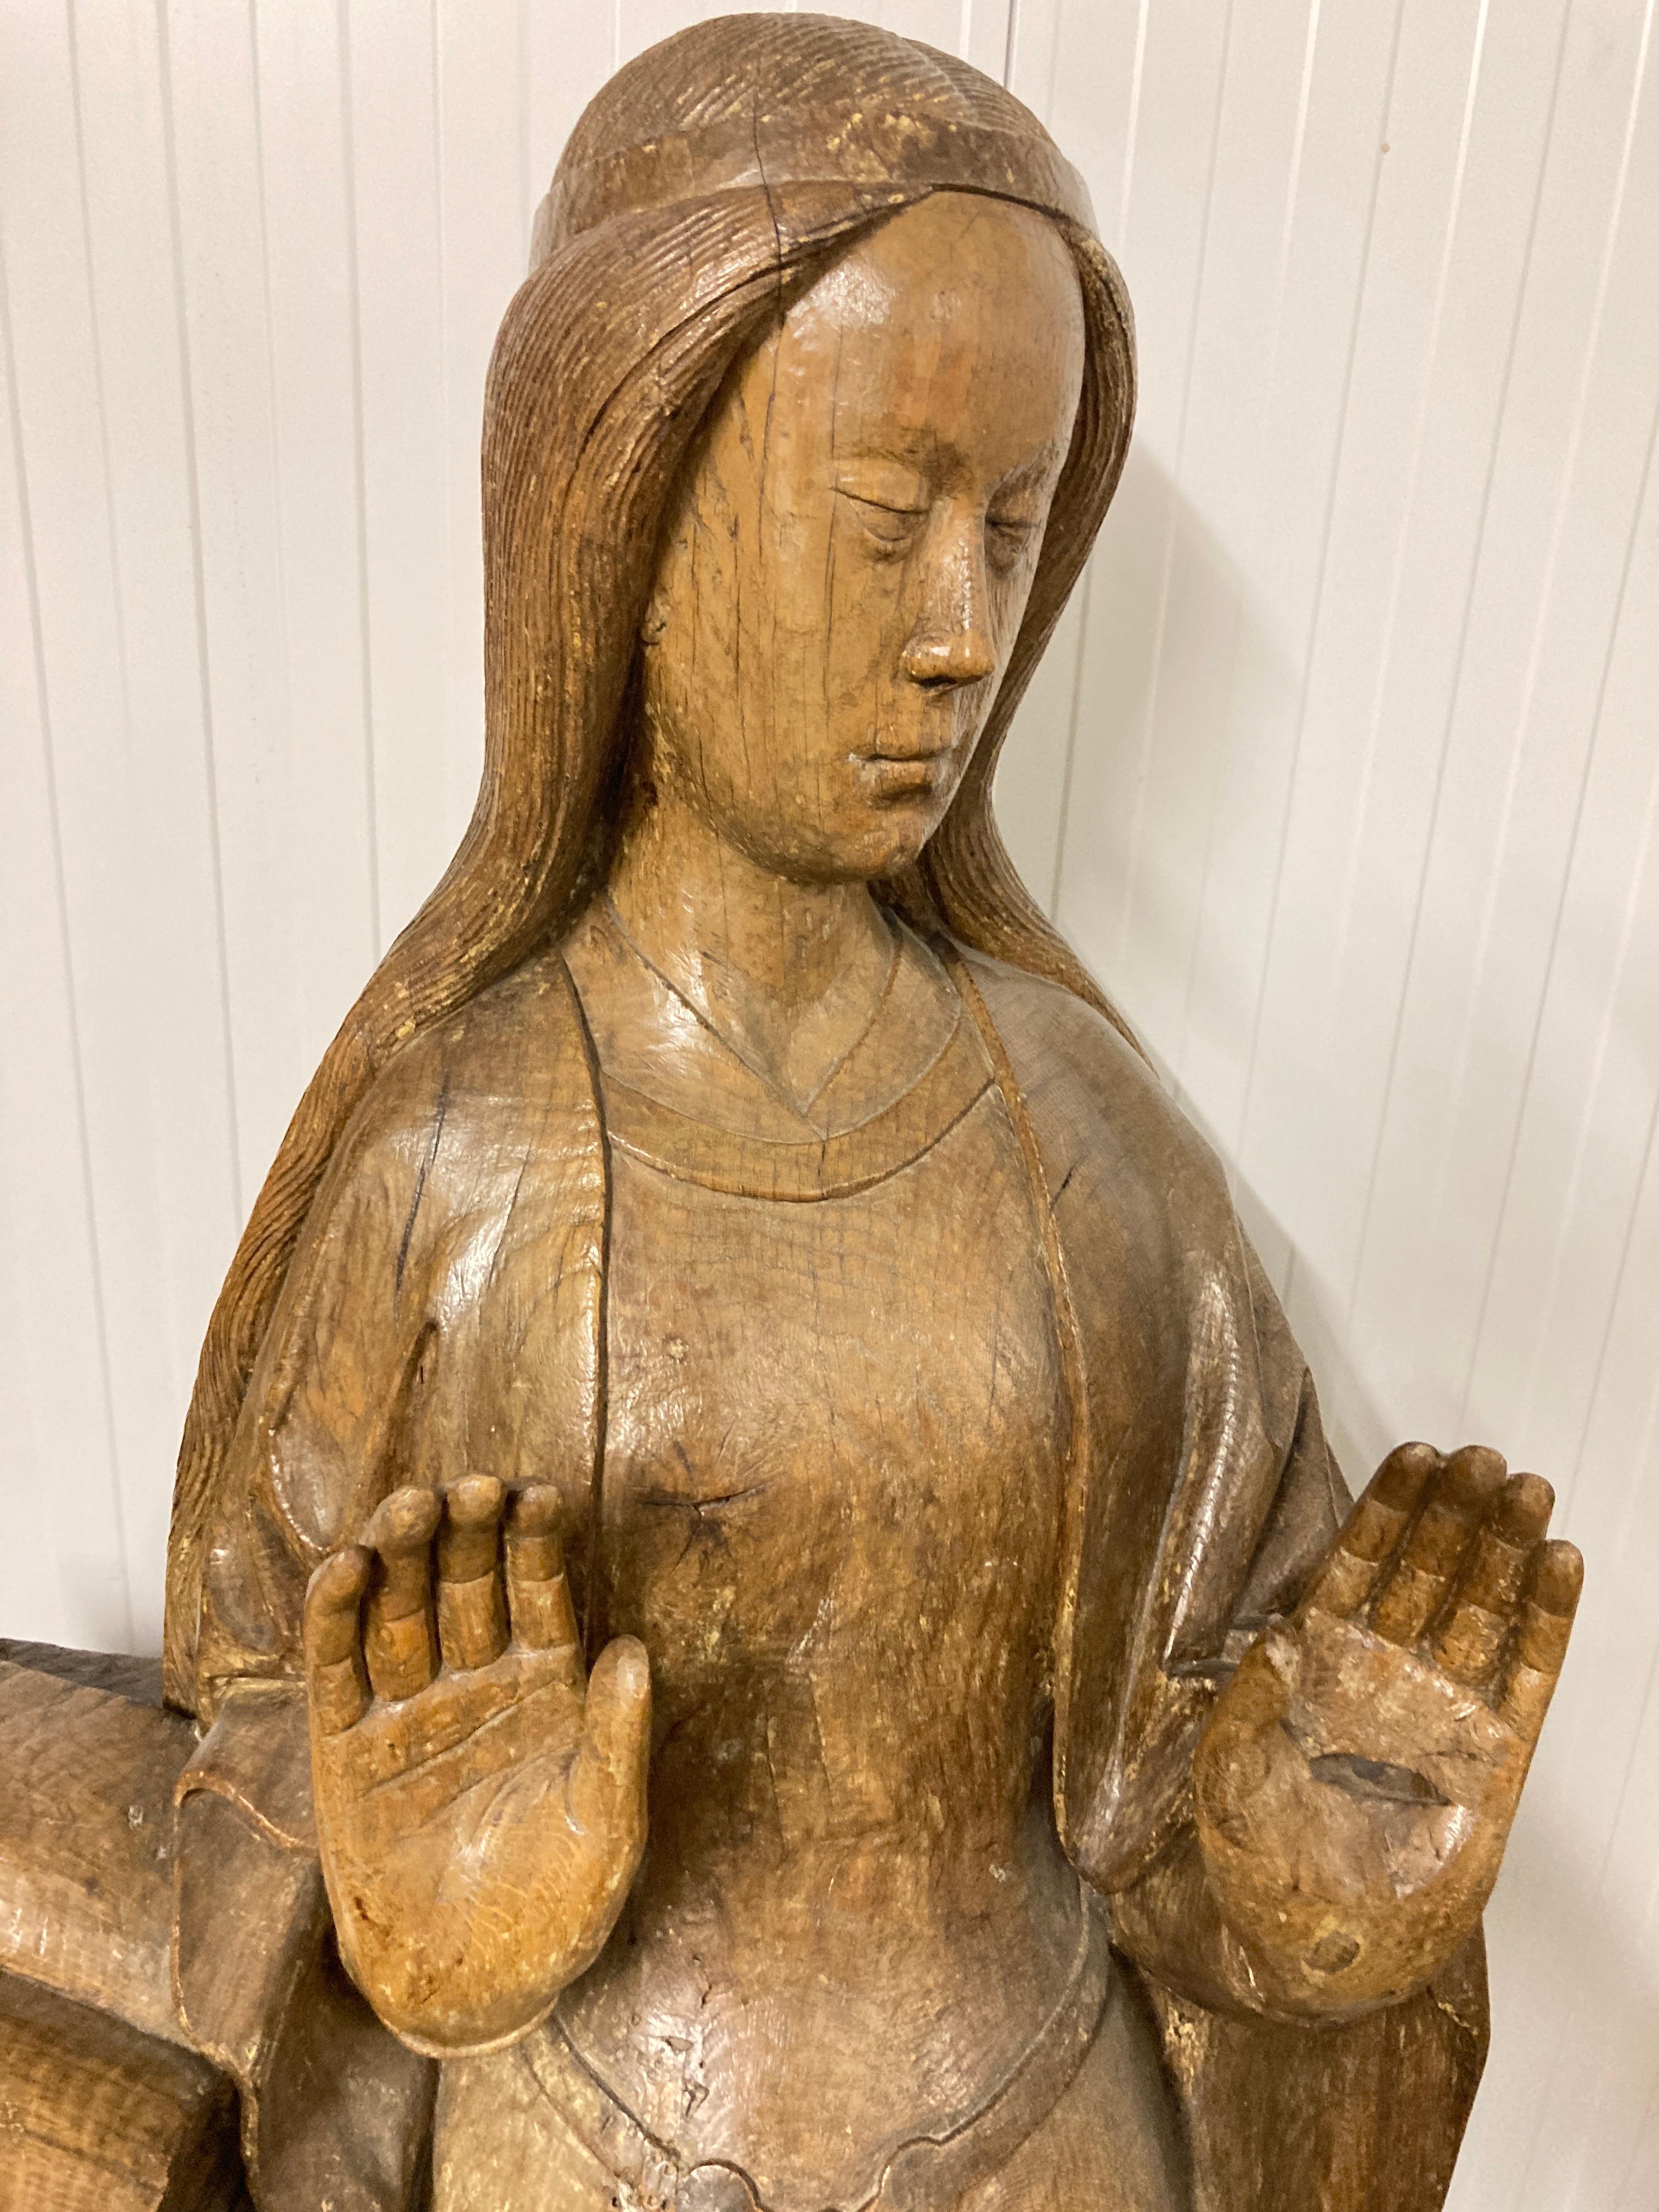 15th Century Oak Wood Sculpture of the Virgin of the Annunciation beside a lectern supporting an opened book, the Virgin with both hands upraised ( one repaired) turning slightly to the left, her demeanour redolent of strength, compassion and